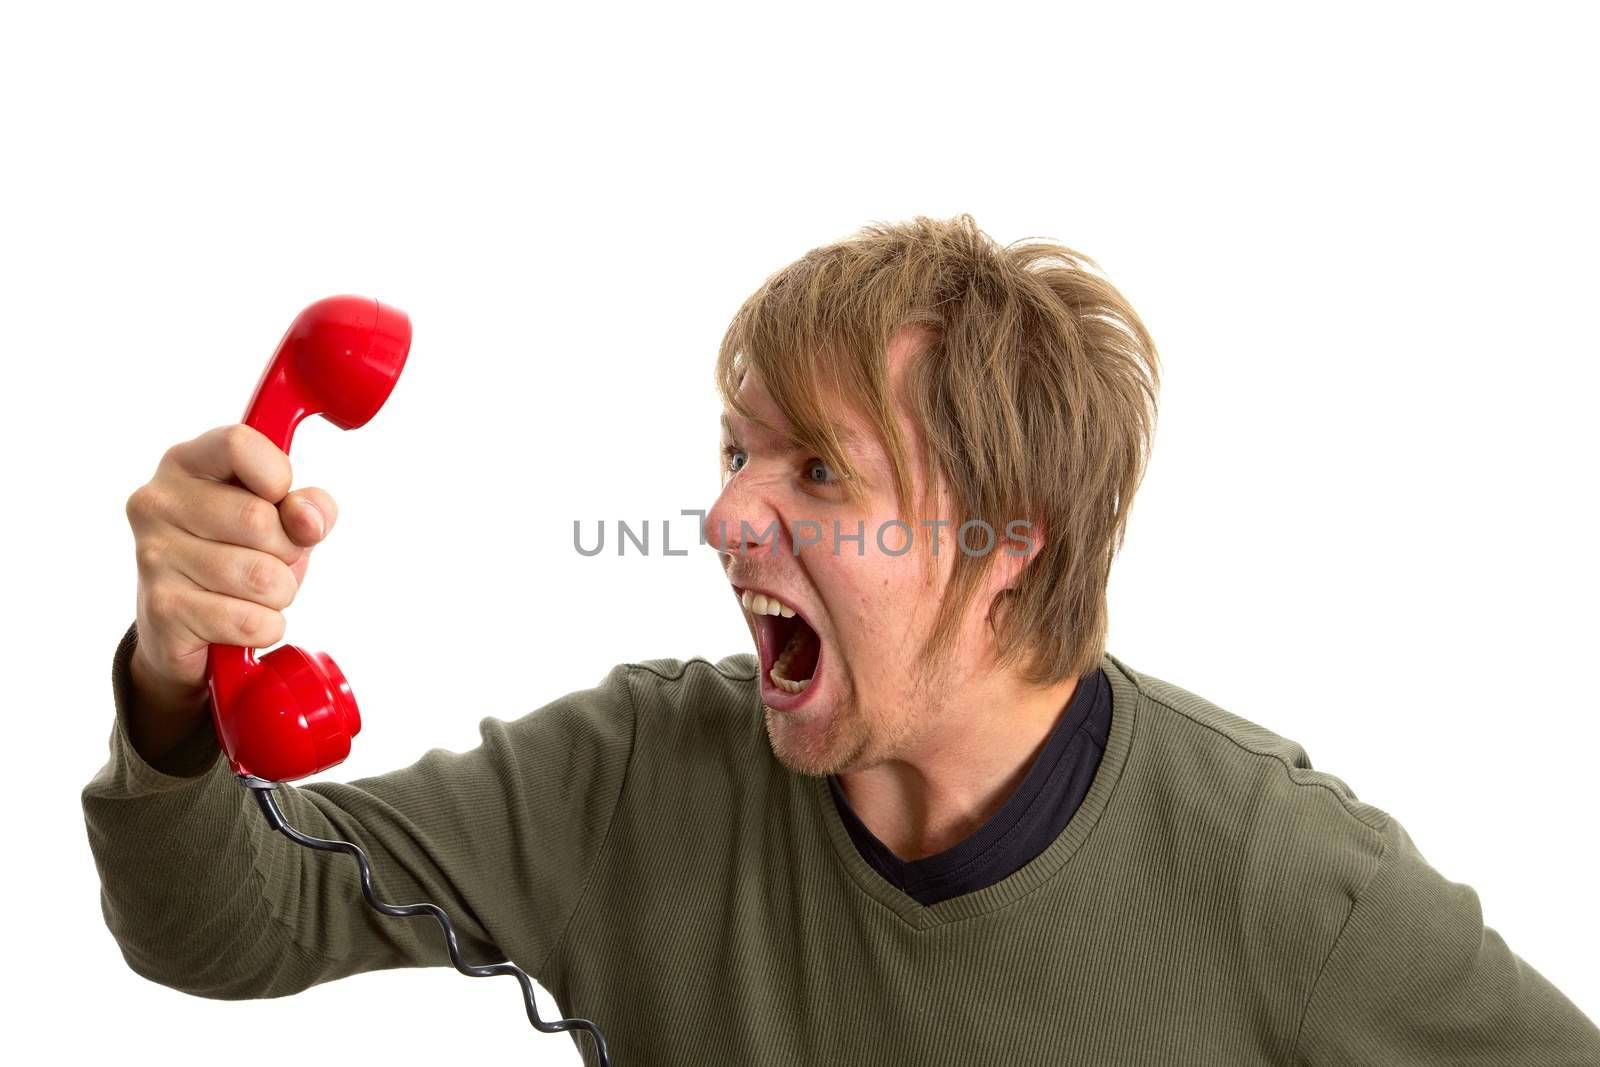 Yelling in the telephone cal